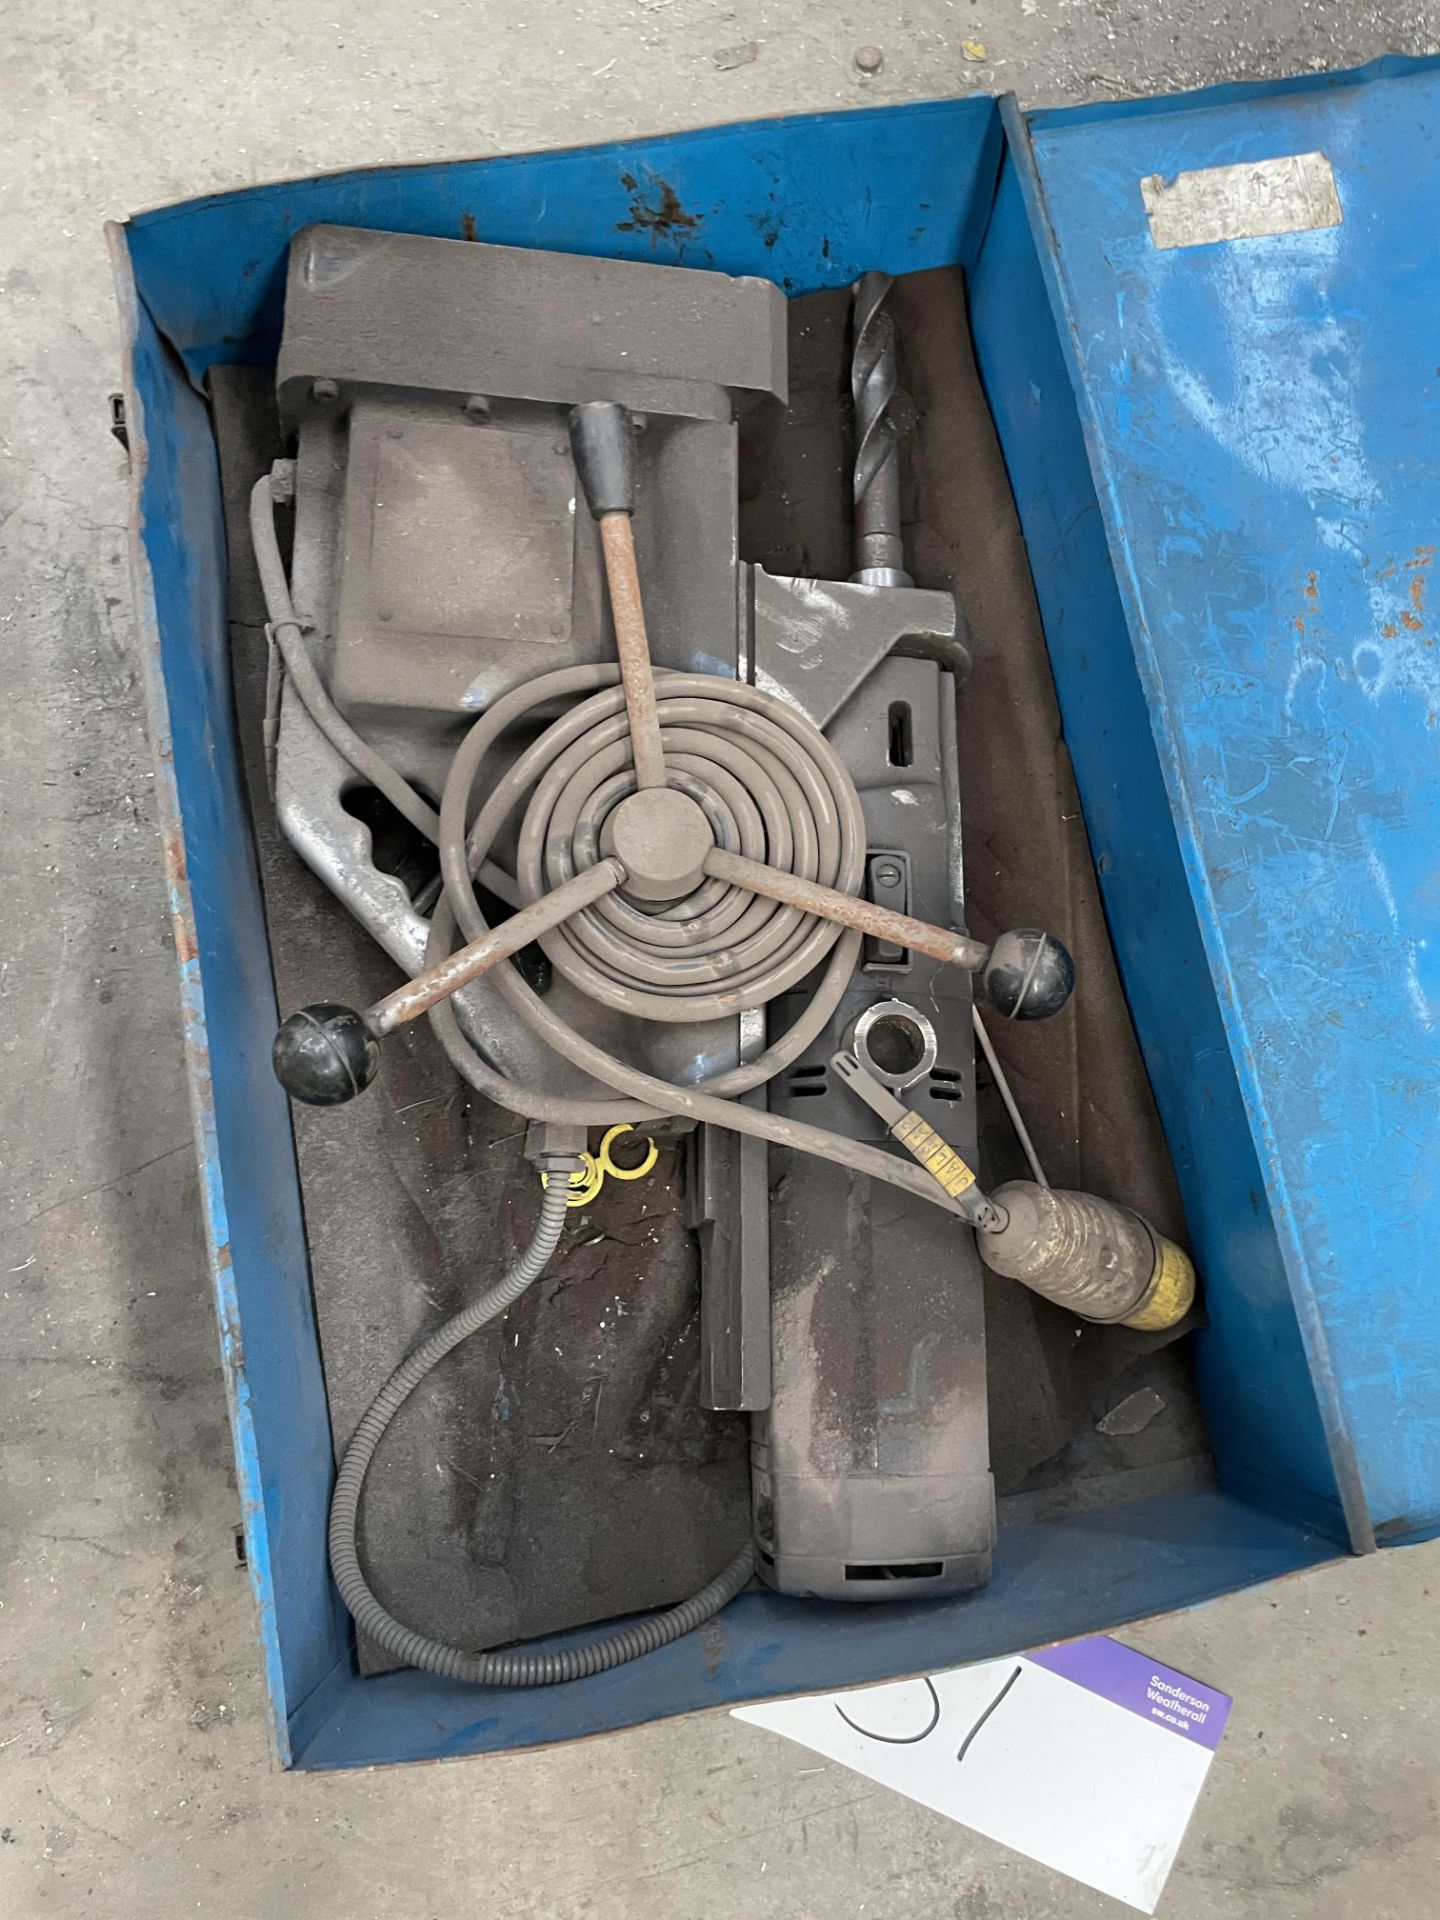 Magnetic Drill Stand, with drill, 110V and case, lot located at Ocean Raw Ltd & Jalna Construction - Image 2 of 2